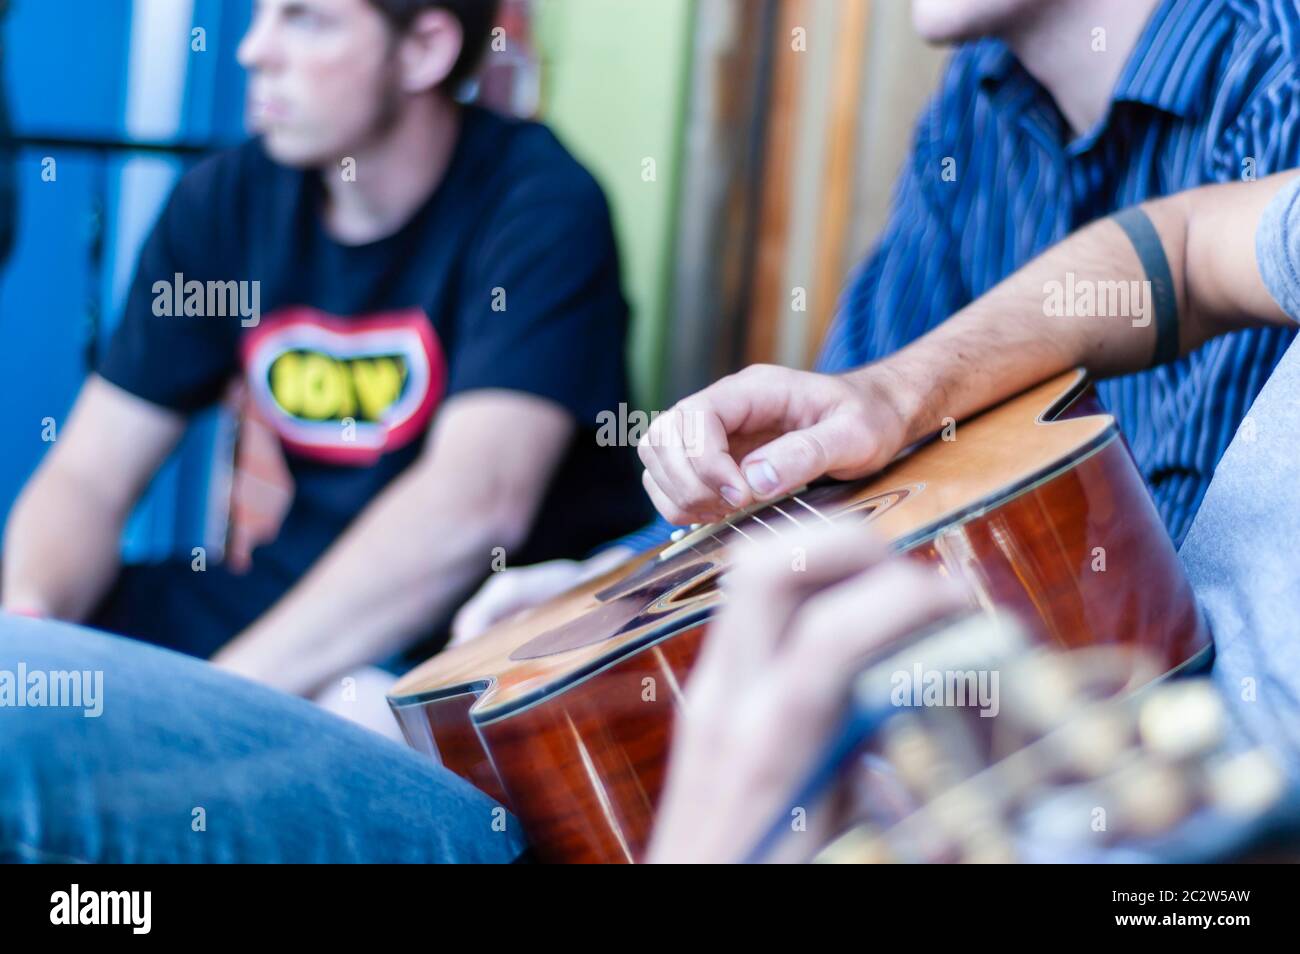 A close up of a musicians hand strumming/plucking/thrumming the chords on a guitar. Stock Photo